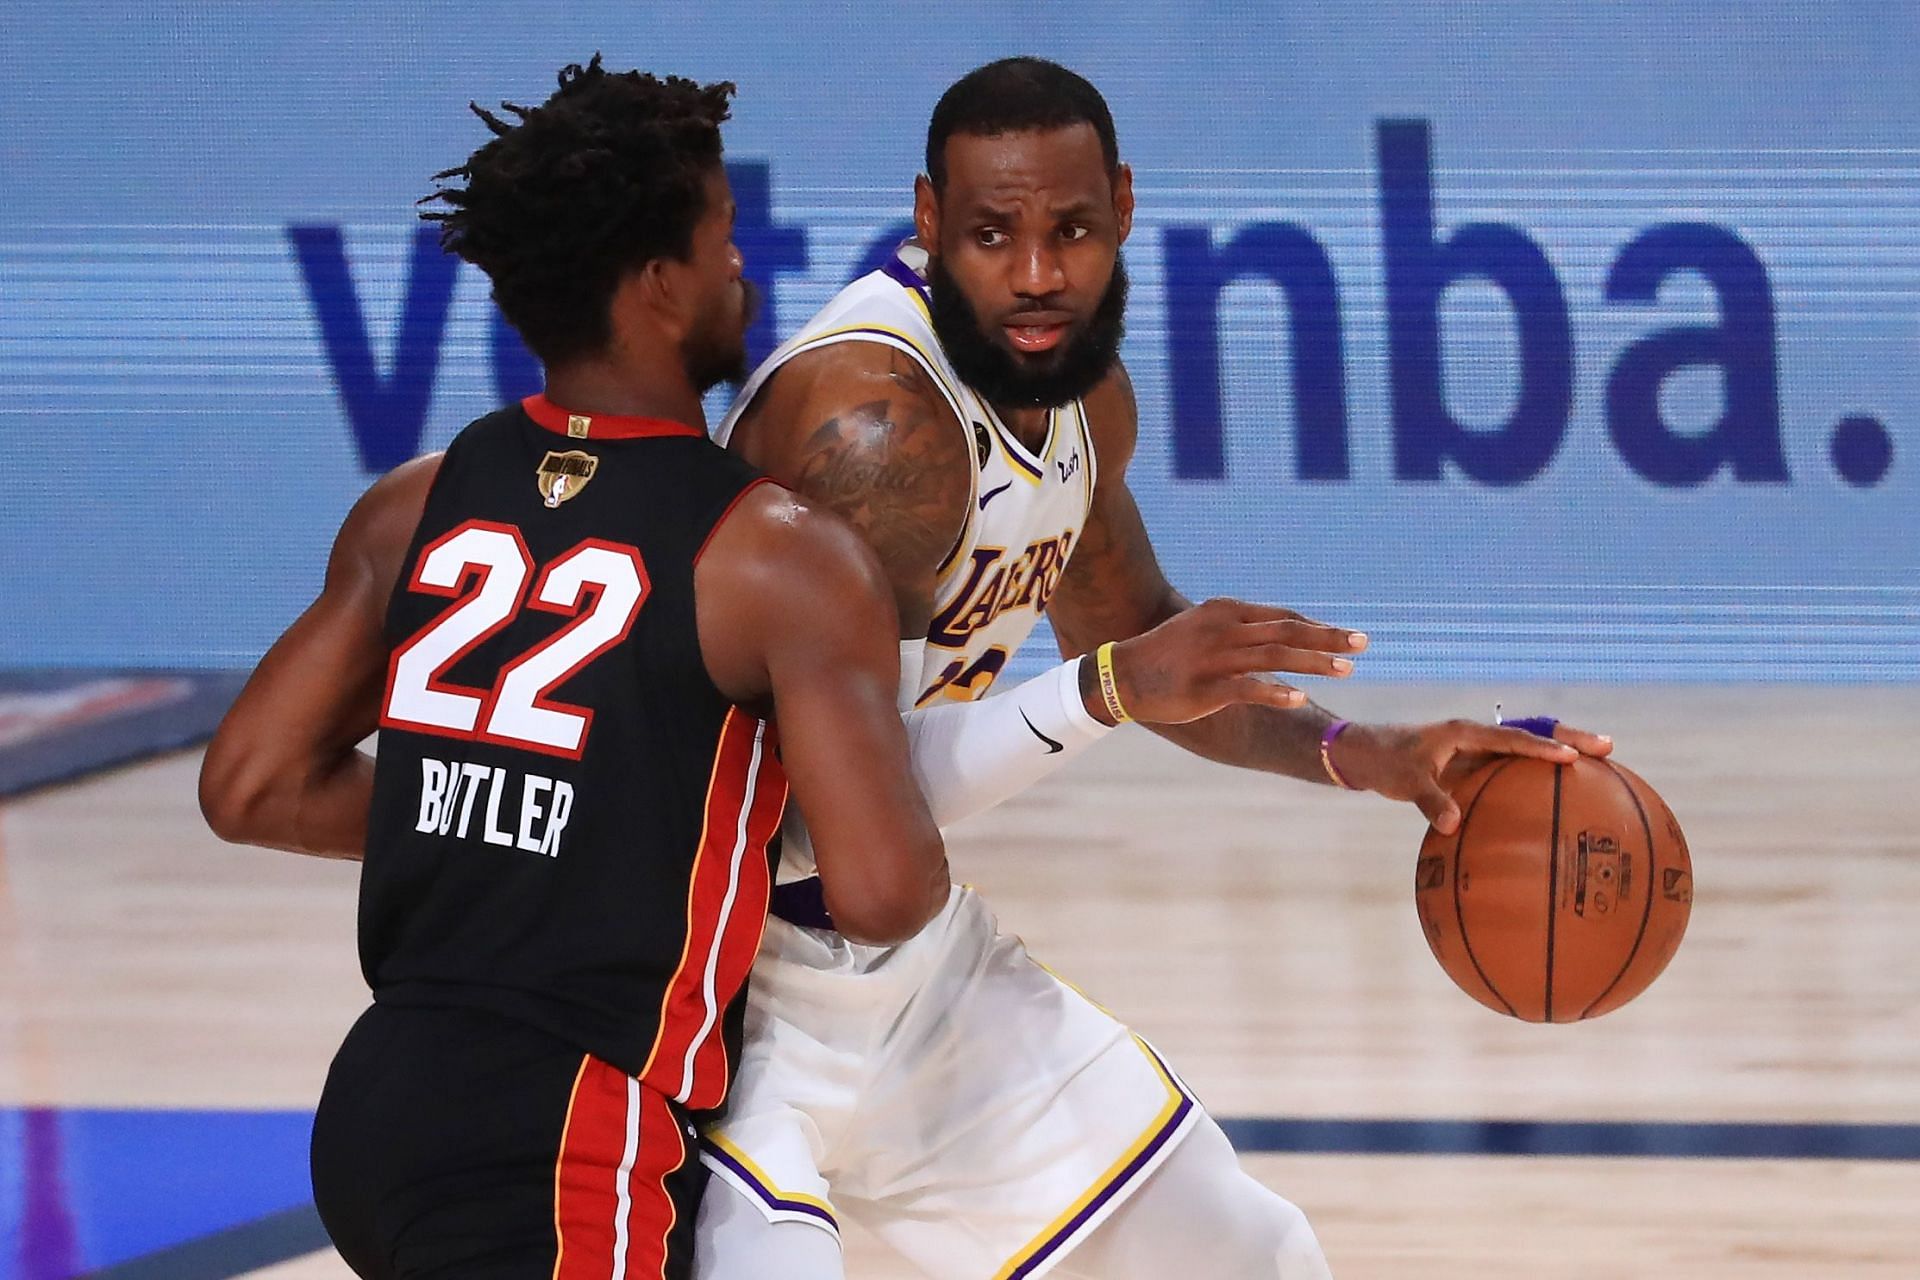 Jimmy Butler had the better of LeBron James on Sunday as the Miami Heat beat the LA Lakers